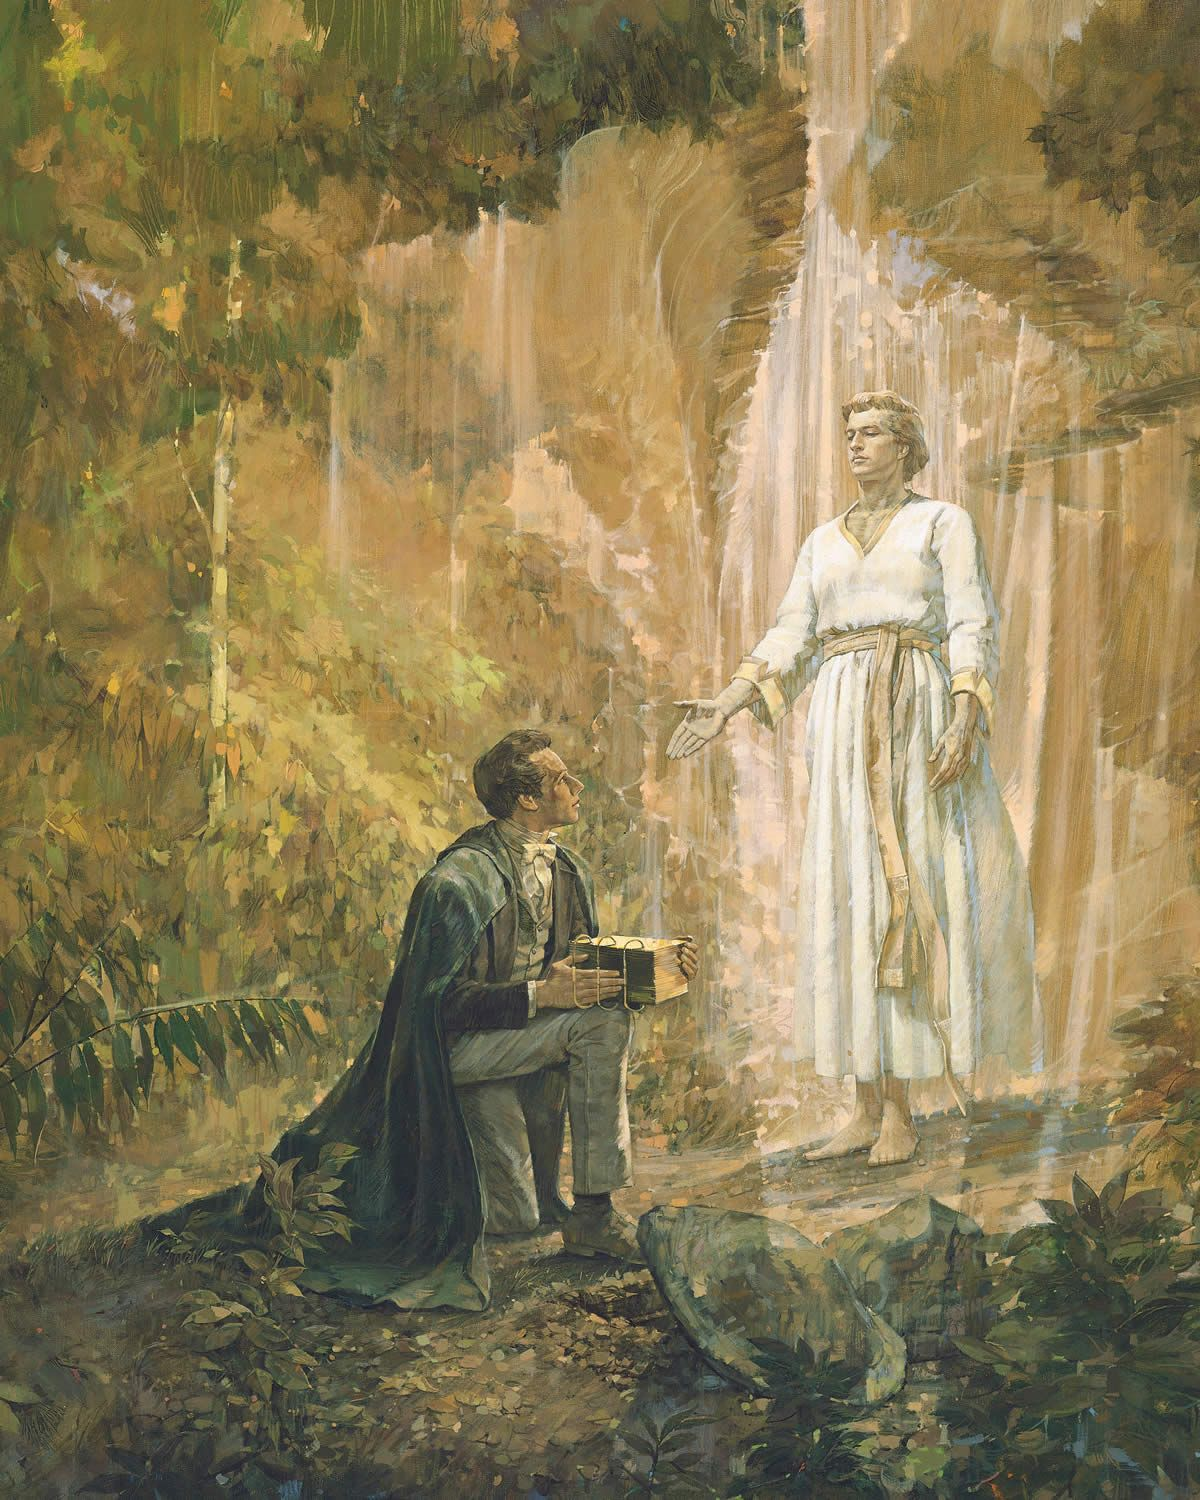 Moroni returns and further instructs the young prophet